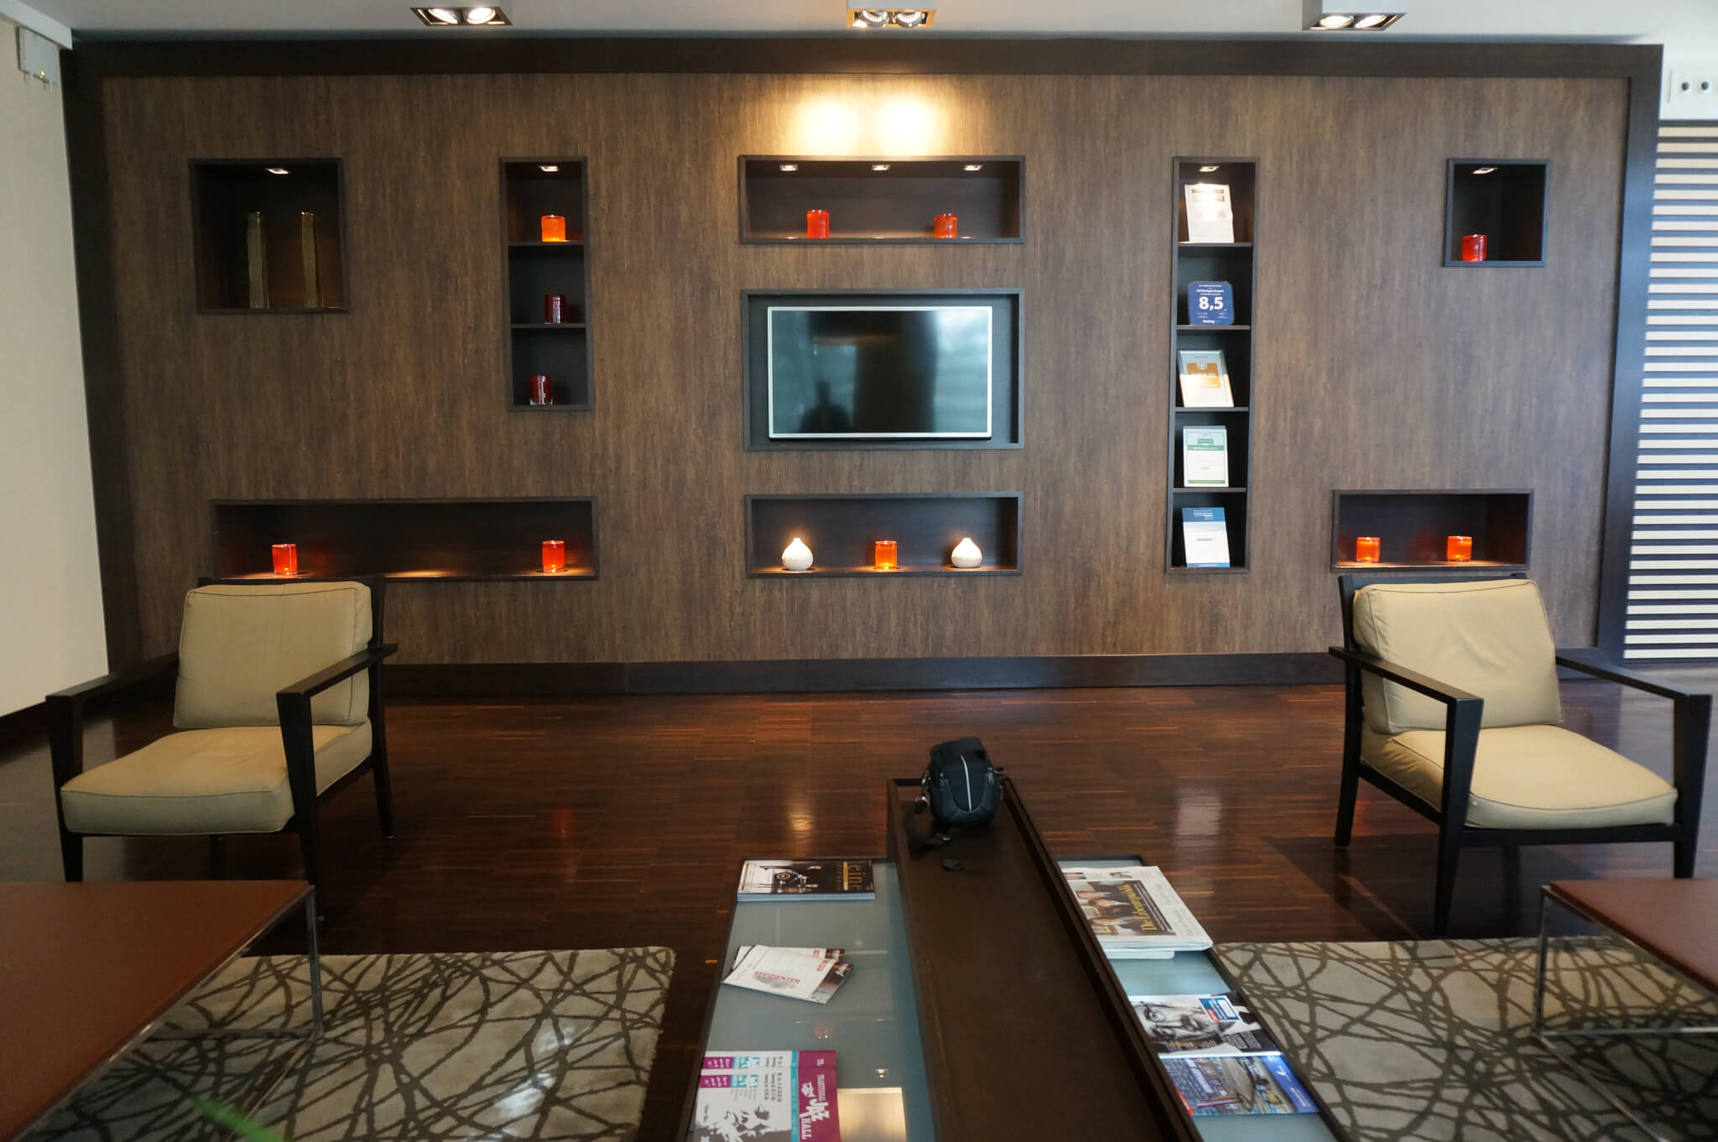 Build your own hotel lobby wall with shelves and cover with wood-effect self-adhesive film